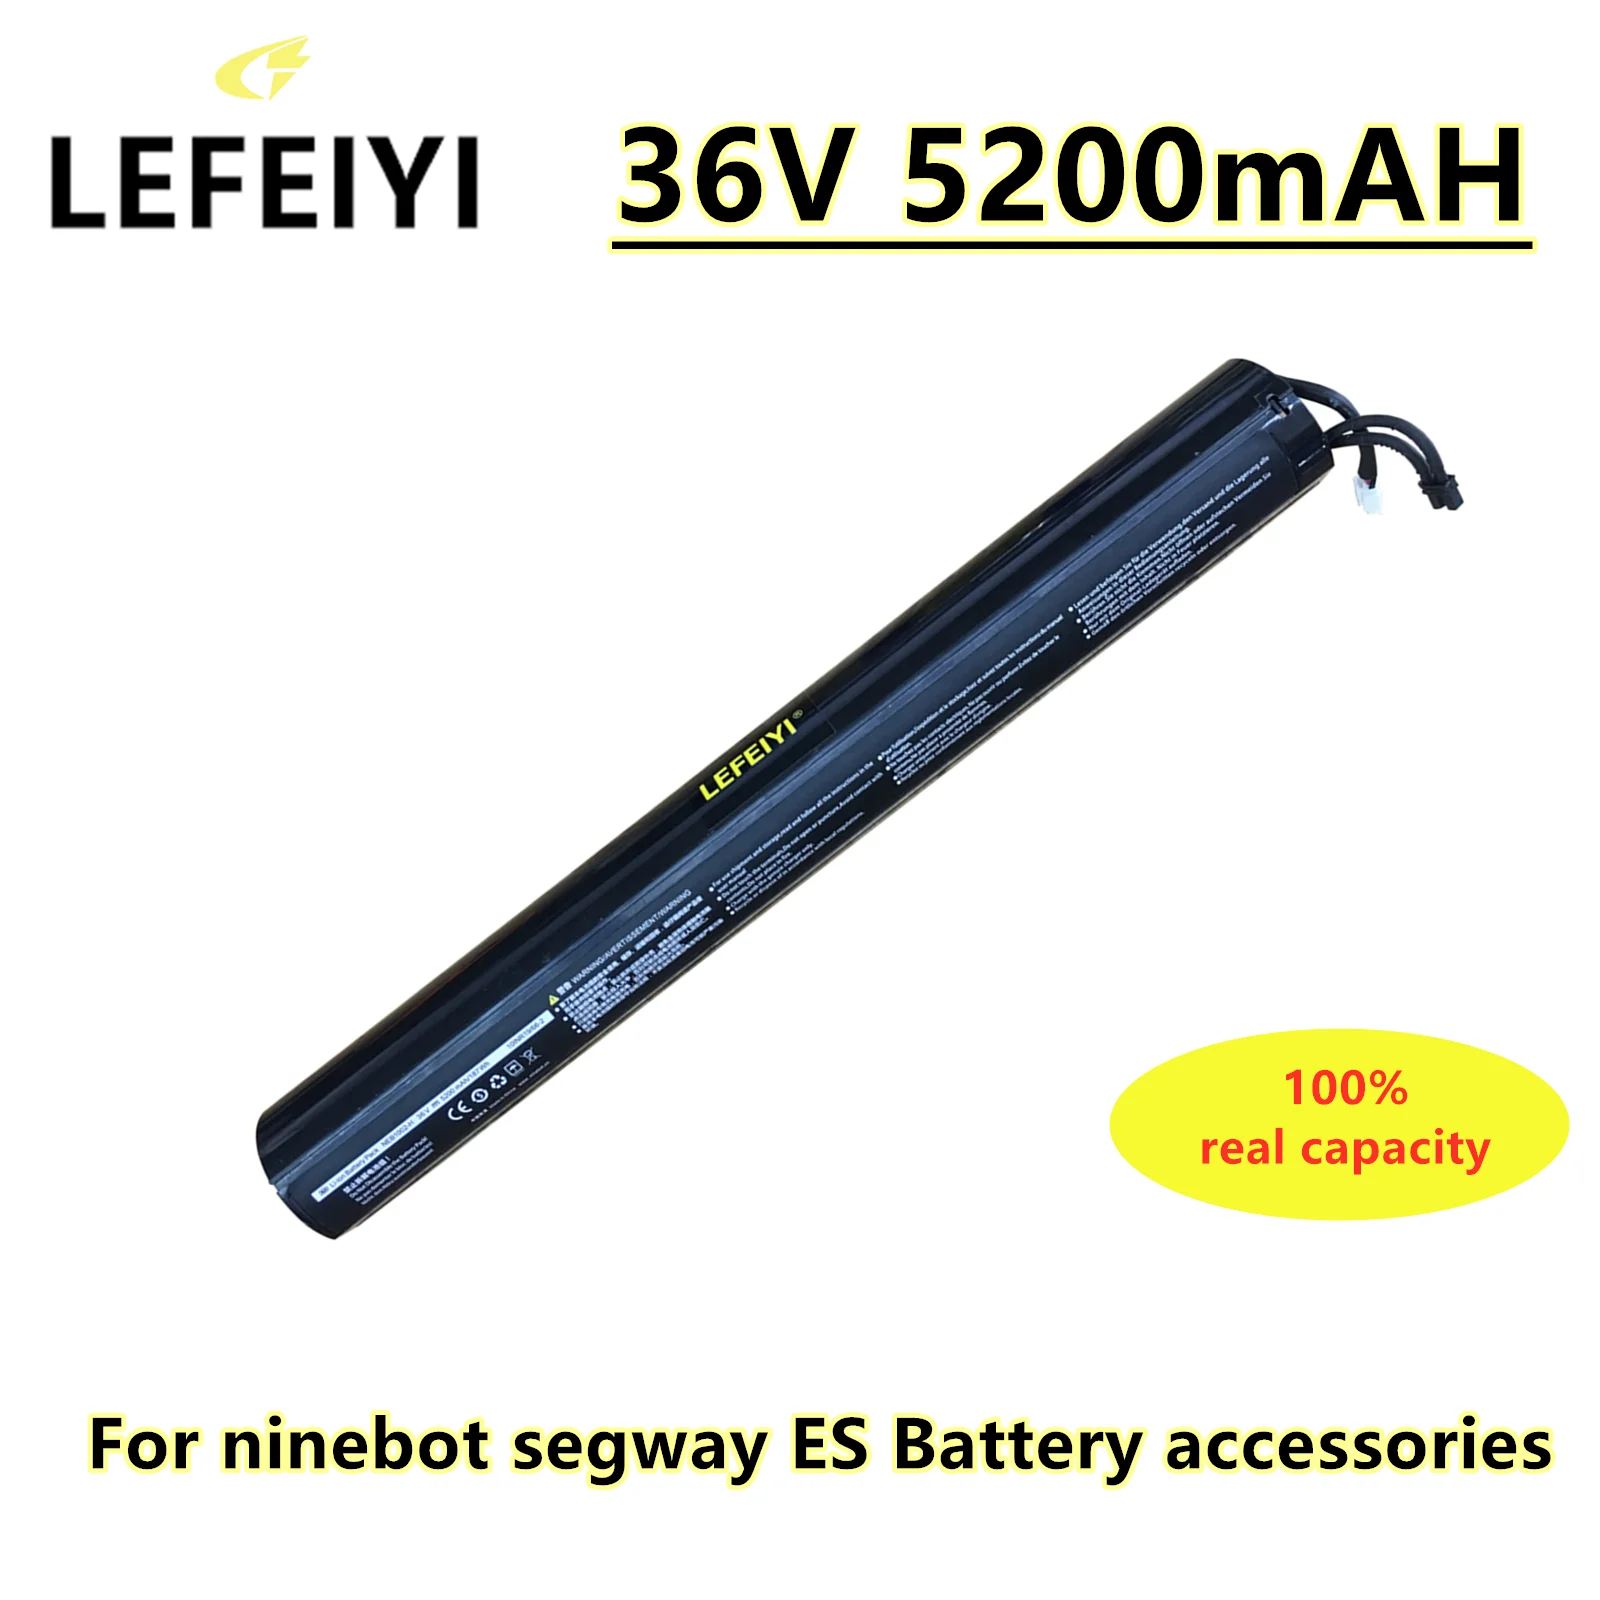 100% Brand New 36V 5200mAh Battery Pack, Suitable for Ninebot Segway Es1 / ES2 / Es3 / Es4 Scooter,Ninebot Segway Scooter Access